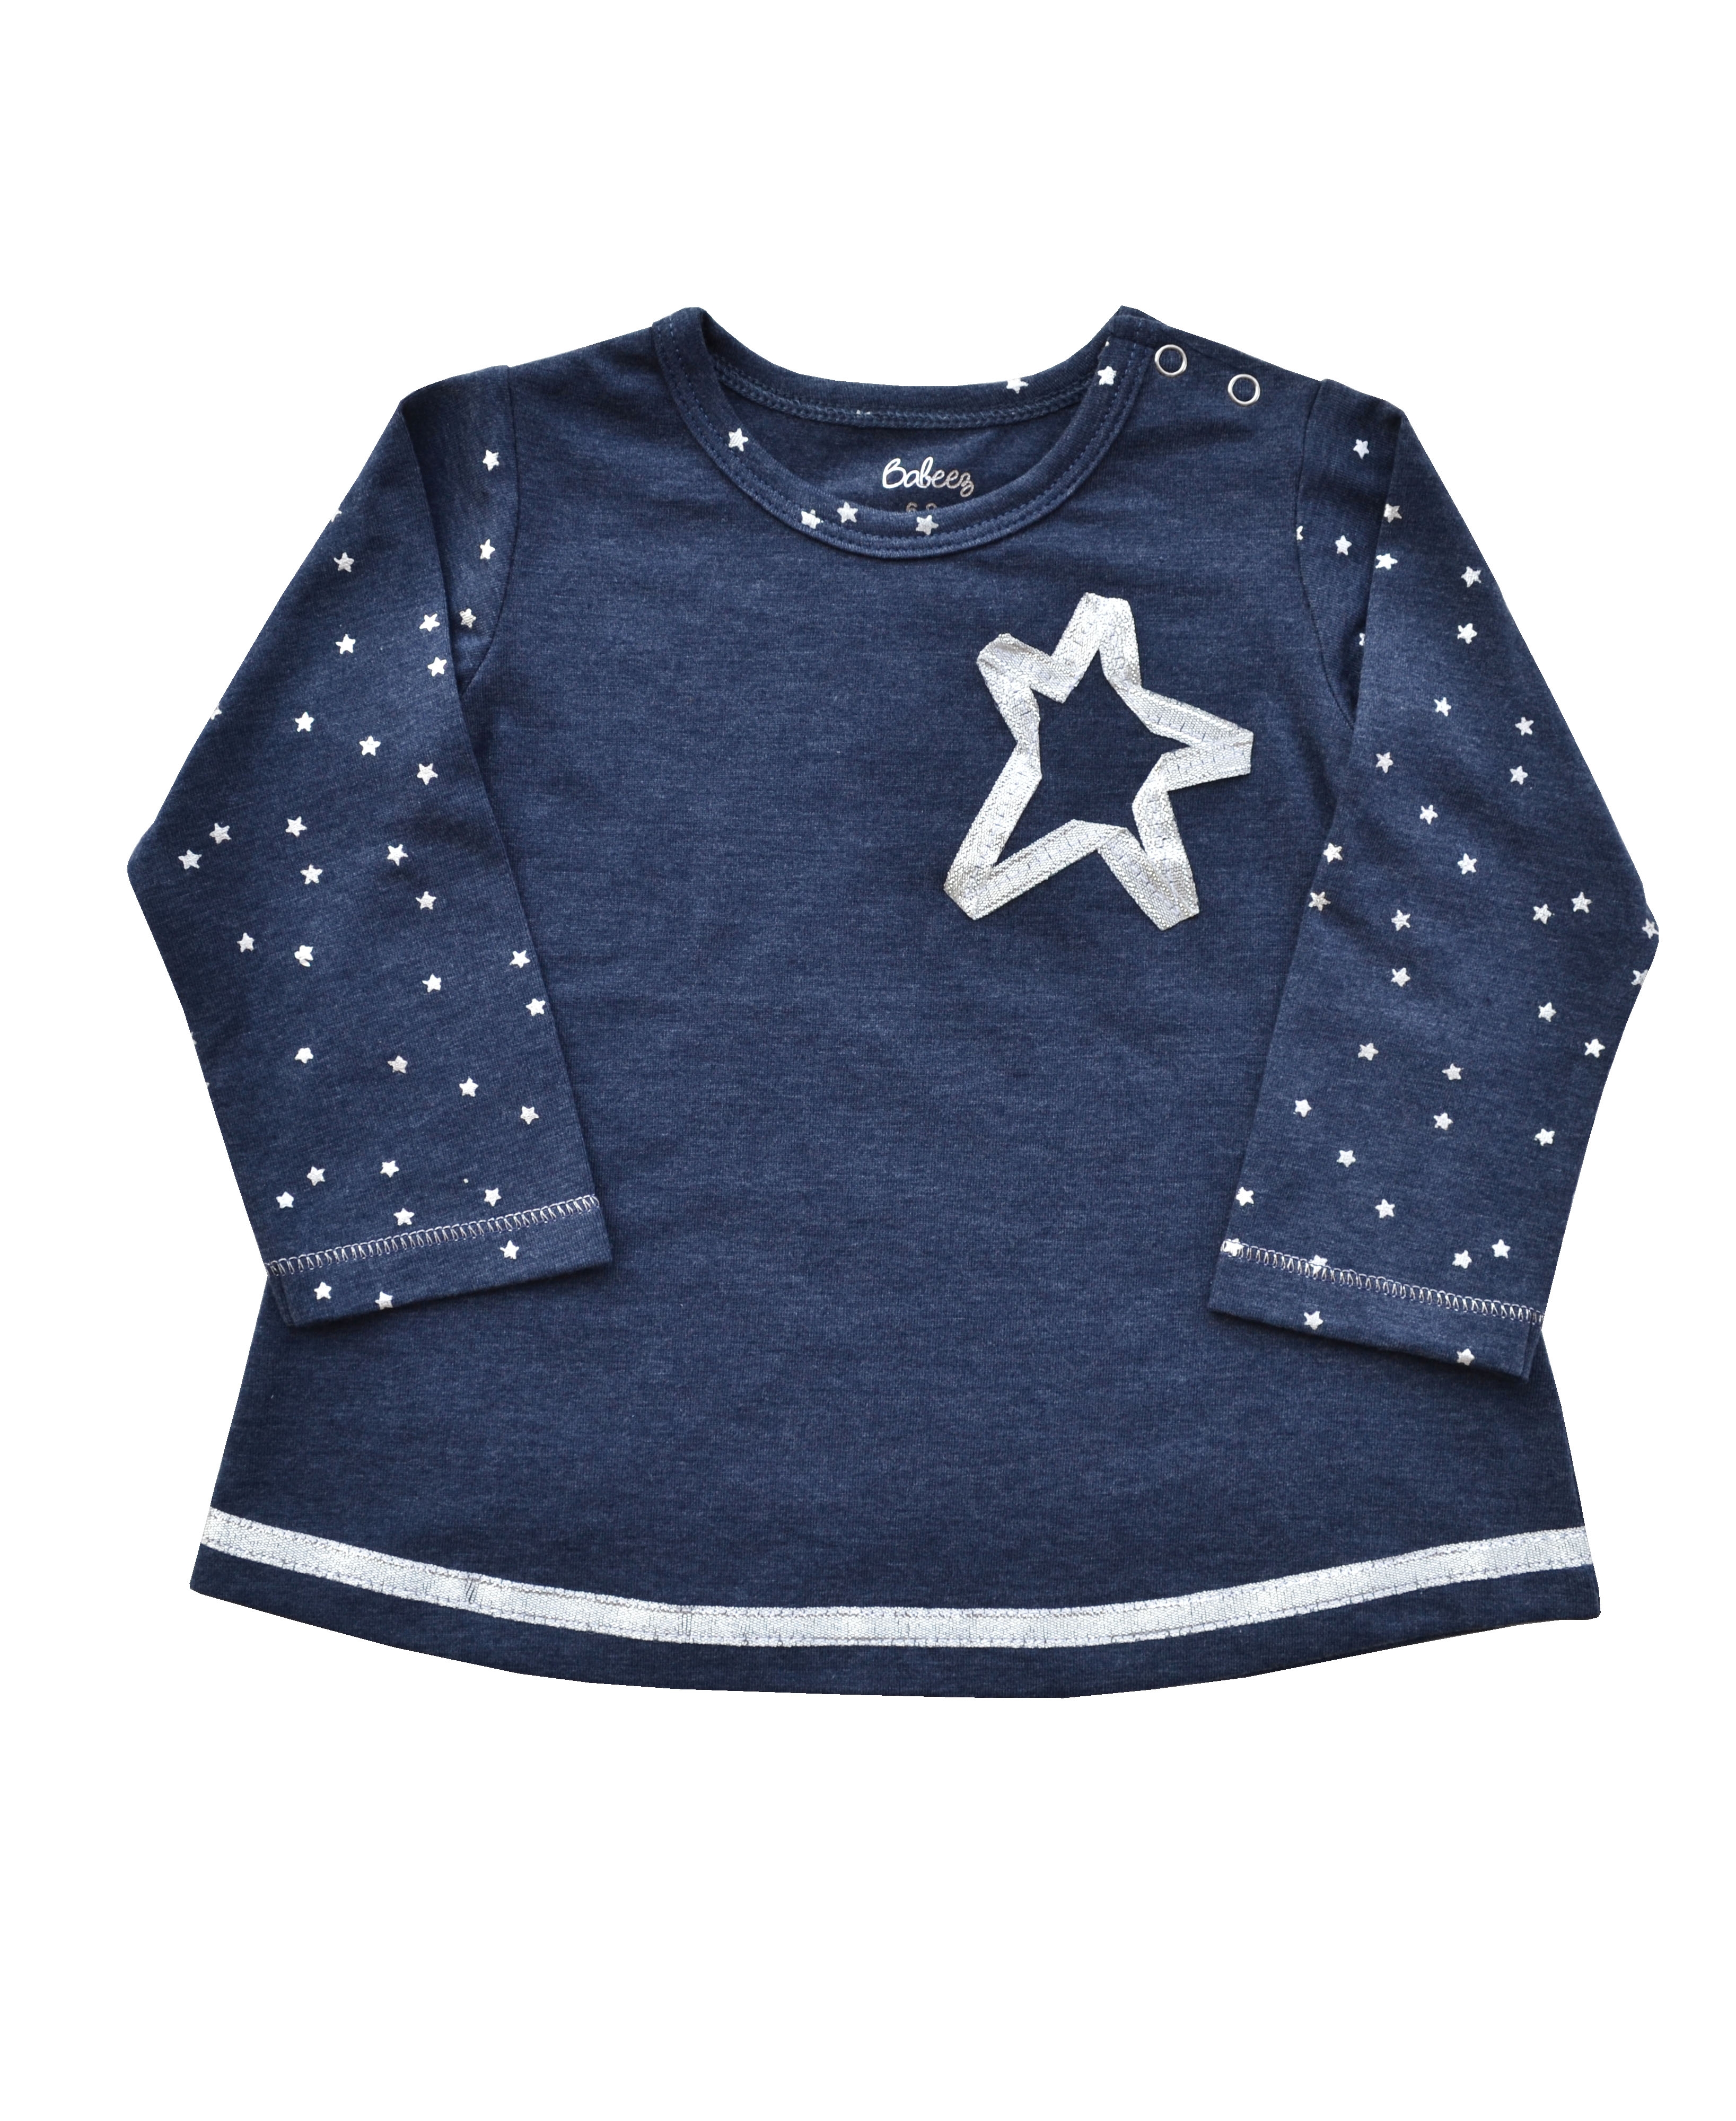 Babeez | Silver Star Applique on Denim Blue Long Sleeves Top (60% Cotton 35% Polyester 5% Elasthan) undefined